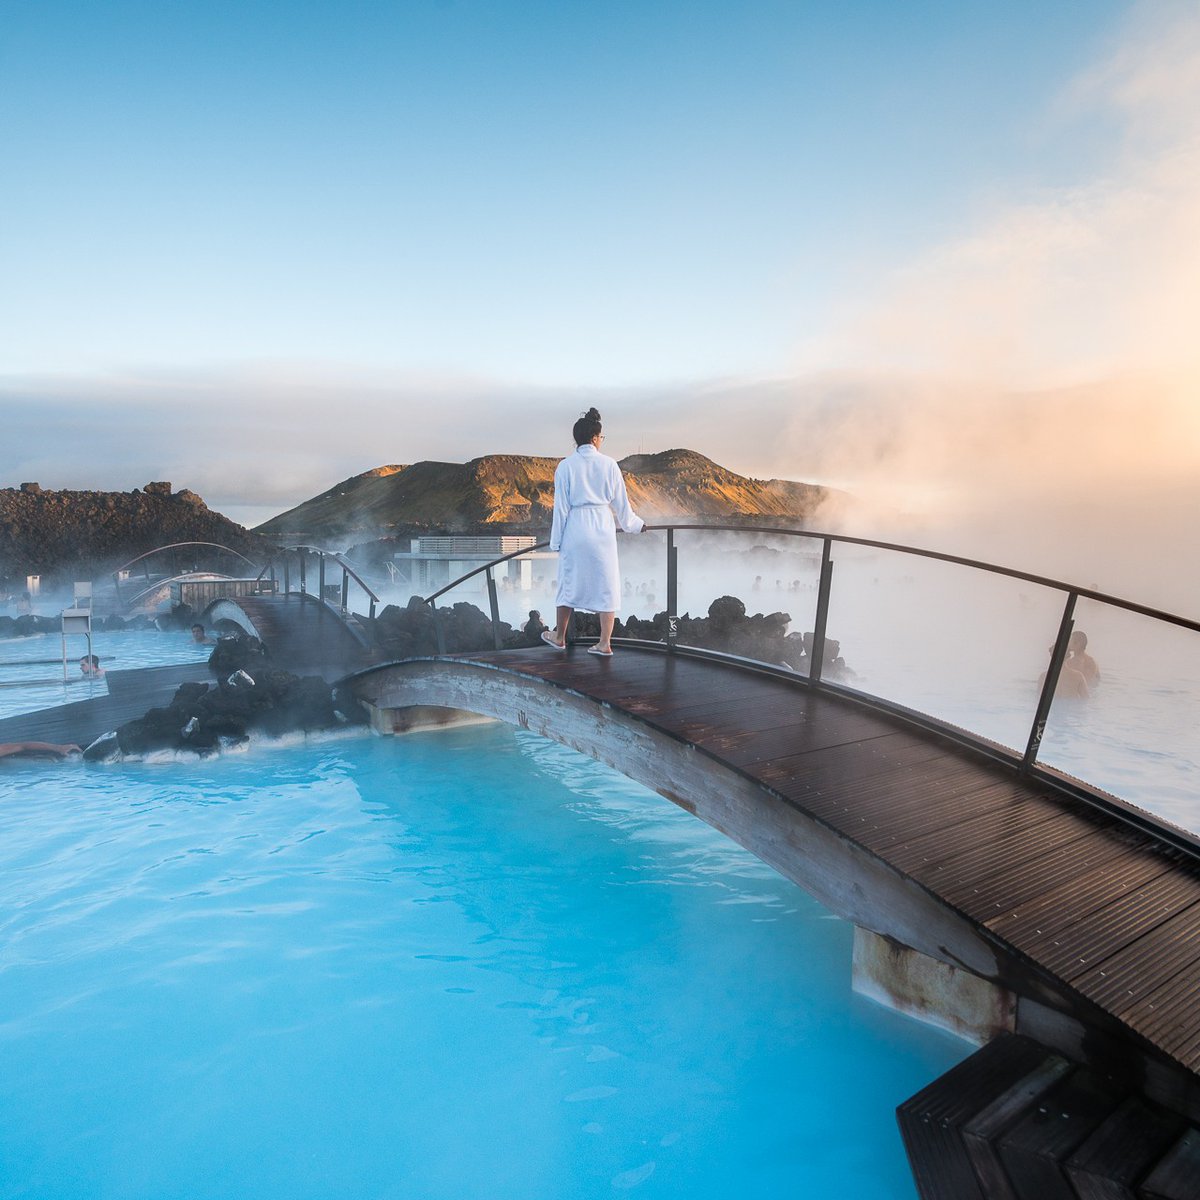 Exciting news! Our new Signature admission is here to elevate your experience. ✨ All the perks of Premium plus the magic of the Blue Lagoon at home. Secure your Signature spot today 💙 #BlueLagoonIceland #Iceland